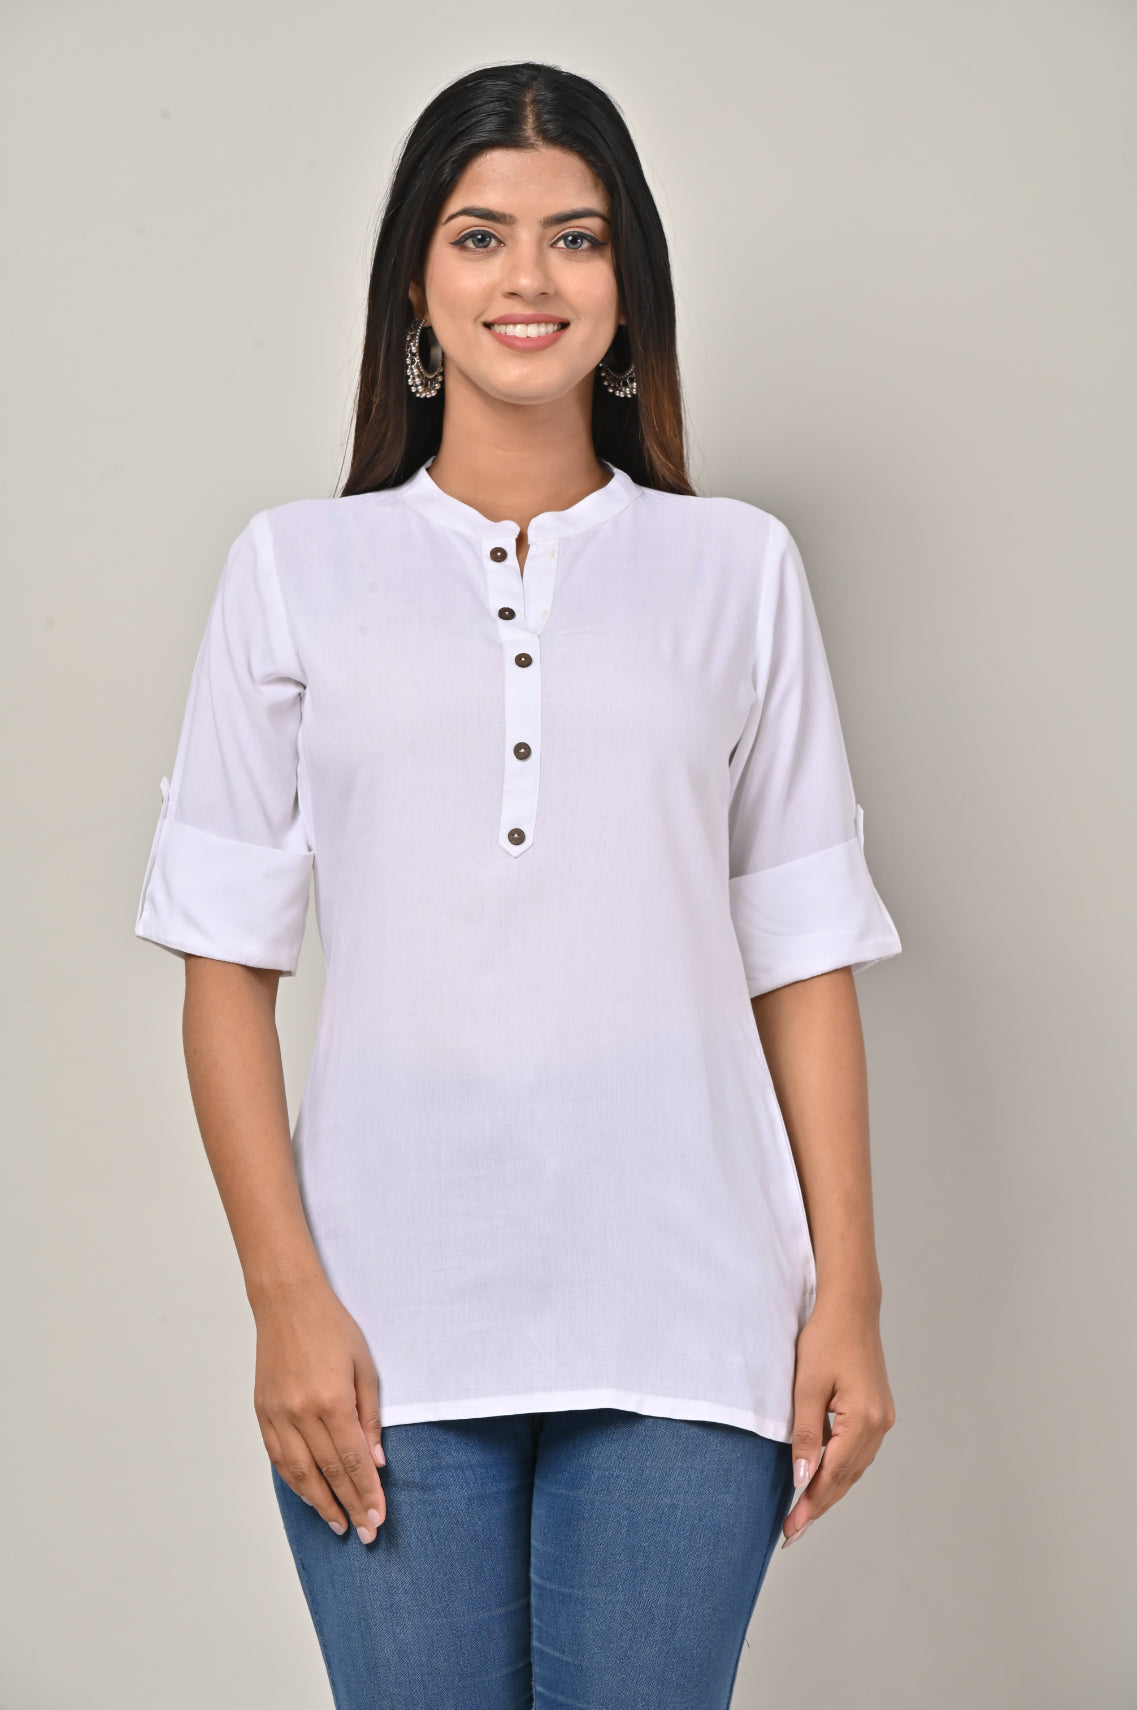 ZUVINO Cotton Short Kurti for Women | Short Kurta for Women | Tunic Tops  for Women | Long Tops for Women | Plus Size Tops for Women. (Small, Blue) :  Amazon.in: Clothing & Accessories